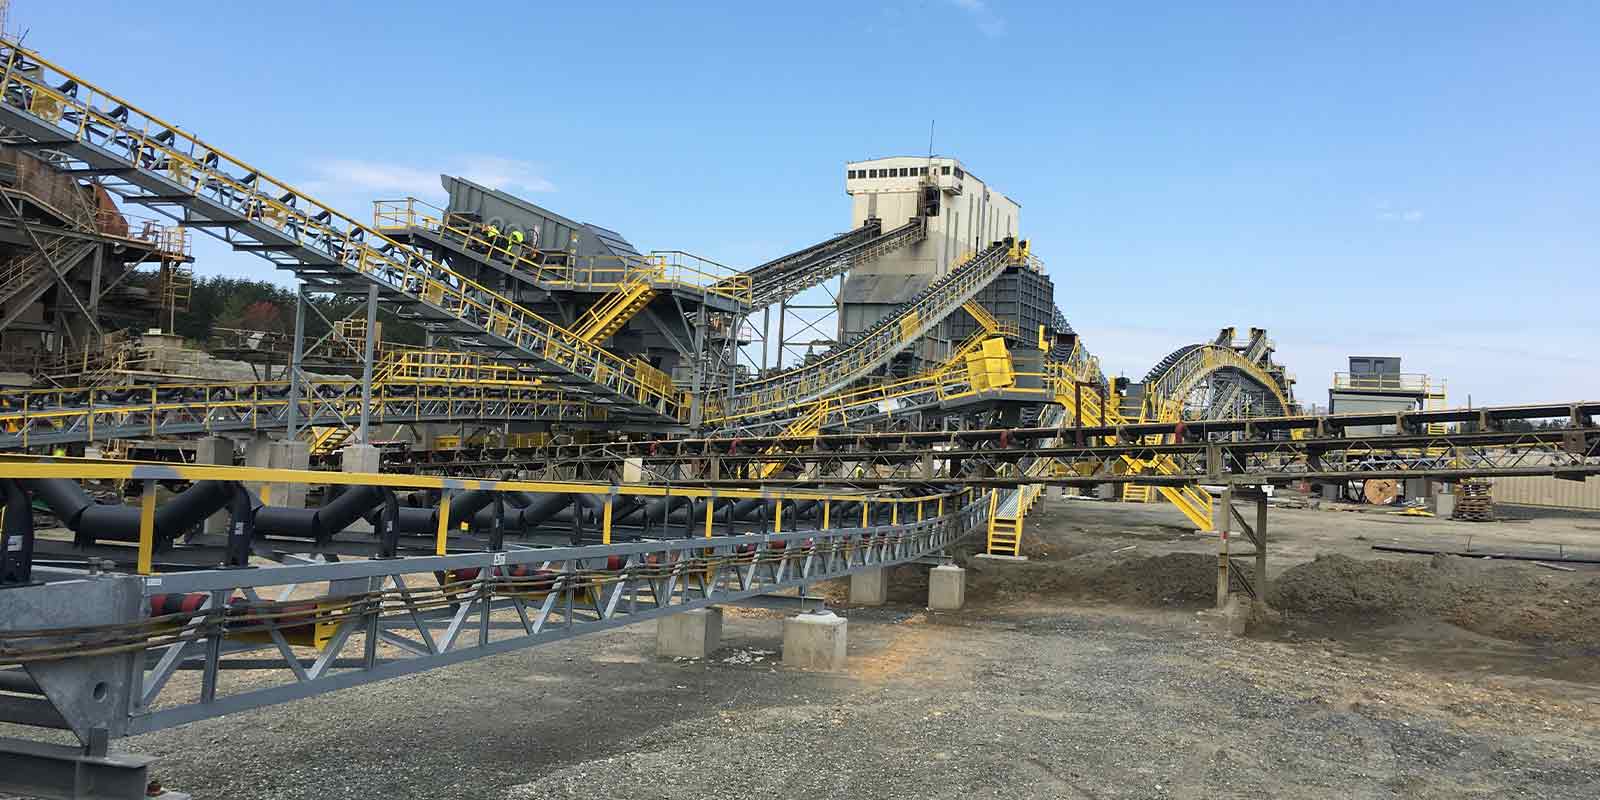 crushing equipment set up and ready to use on a crushing plant